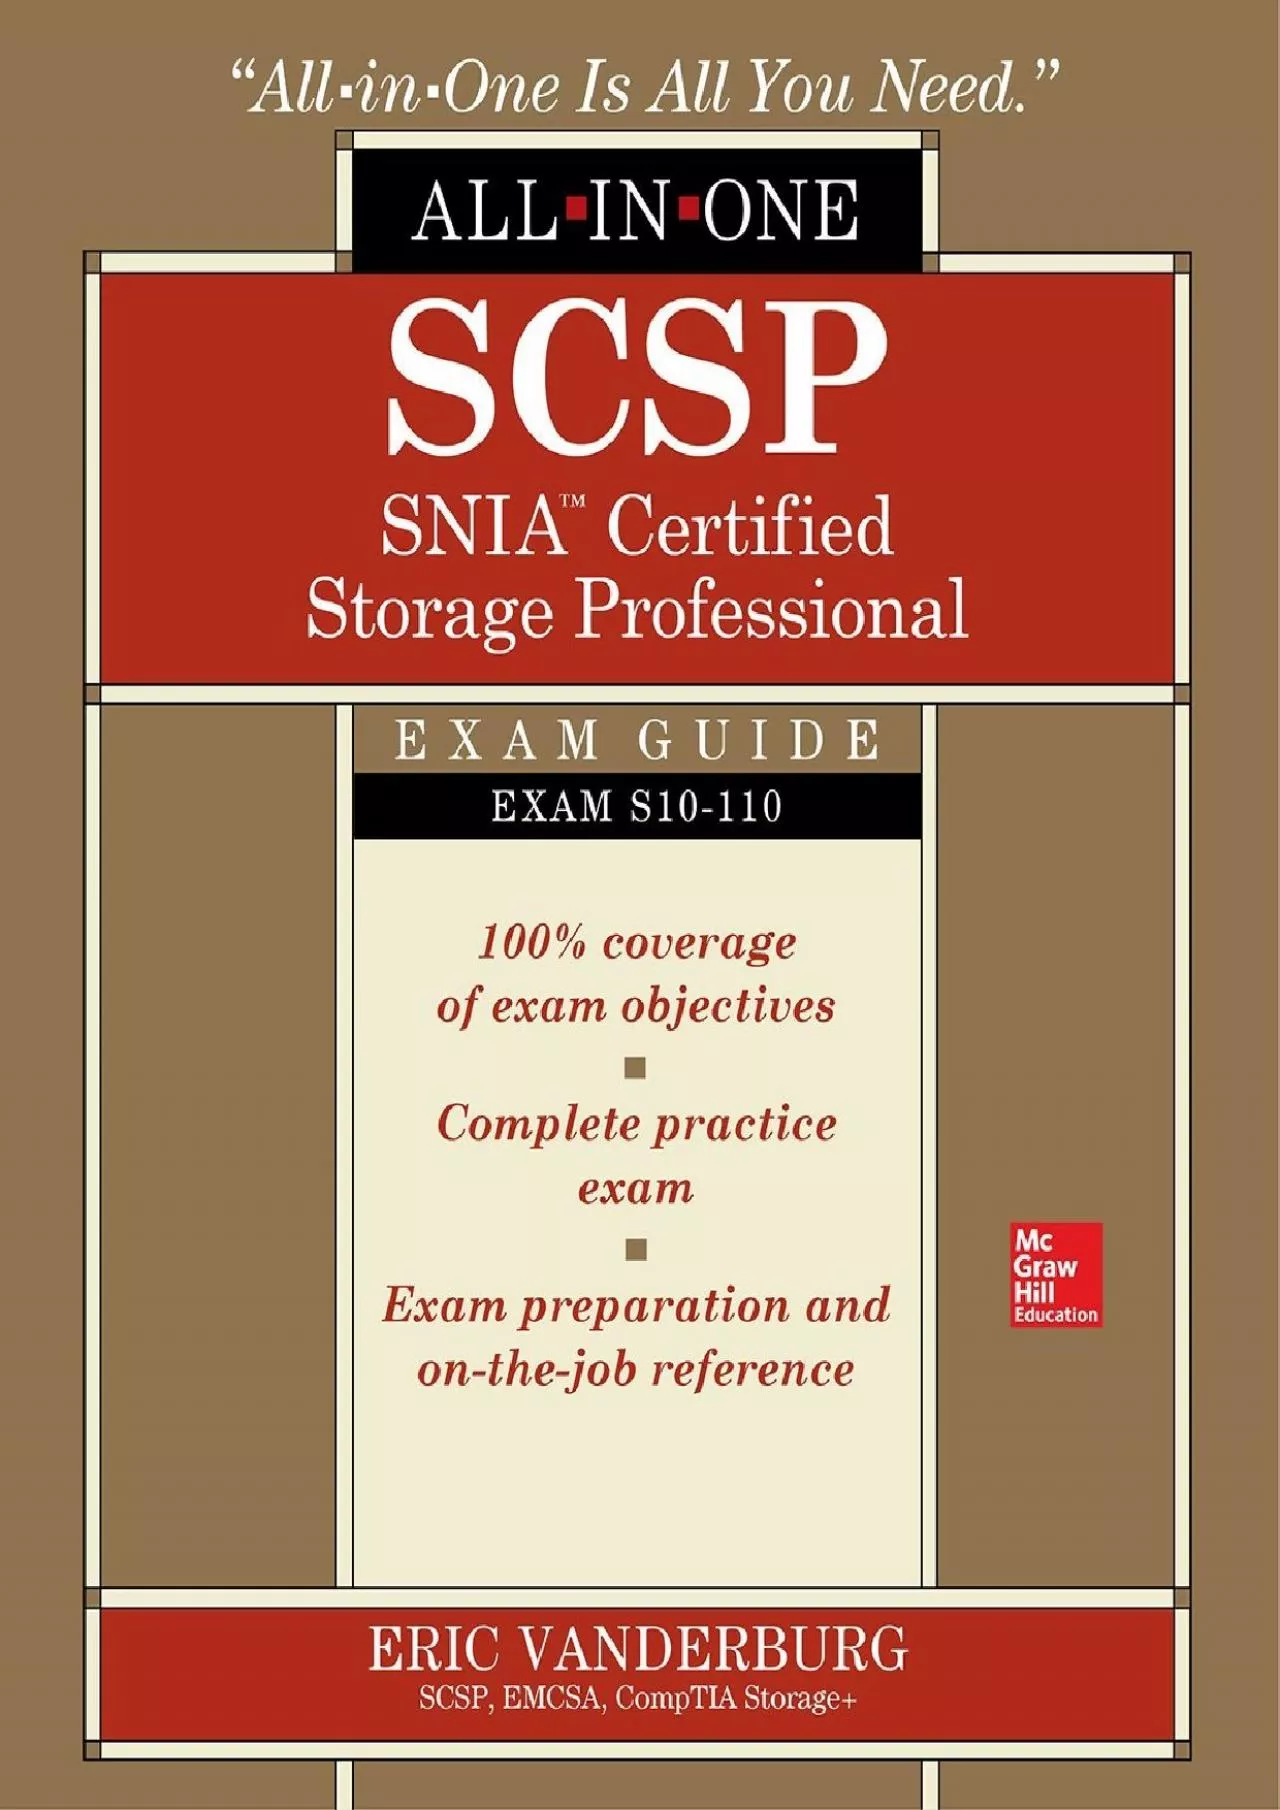 [FREE]-SCSP SNIA Certified Storage Professional All-in-One Exam Guide (Exam S10-110)